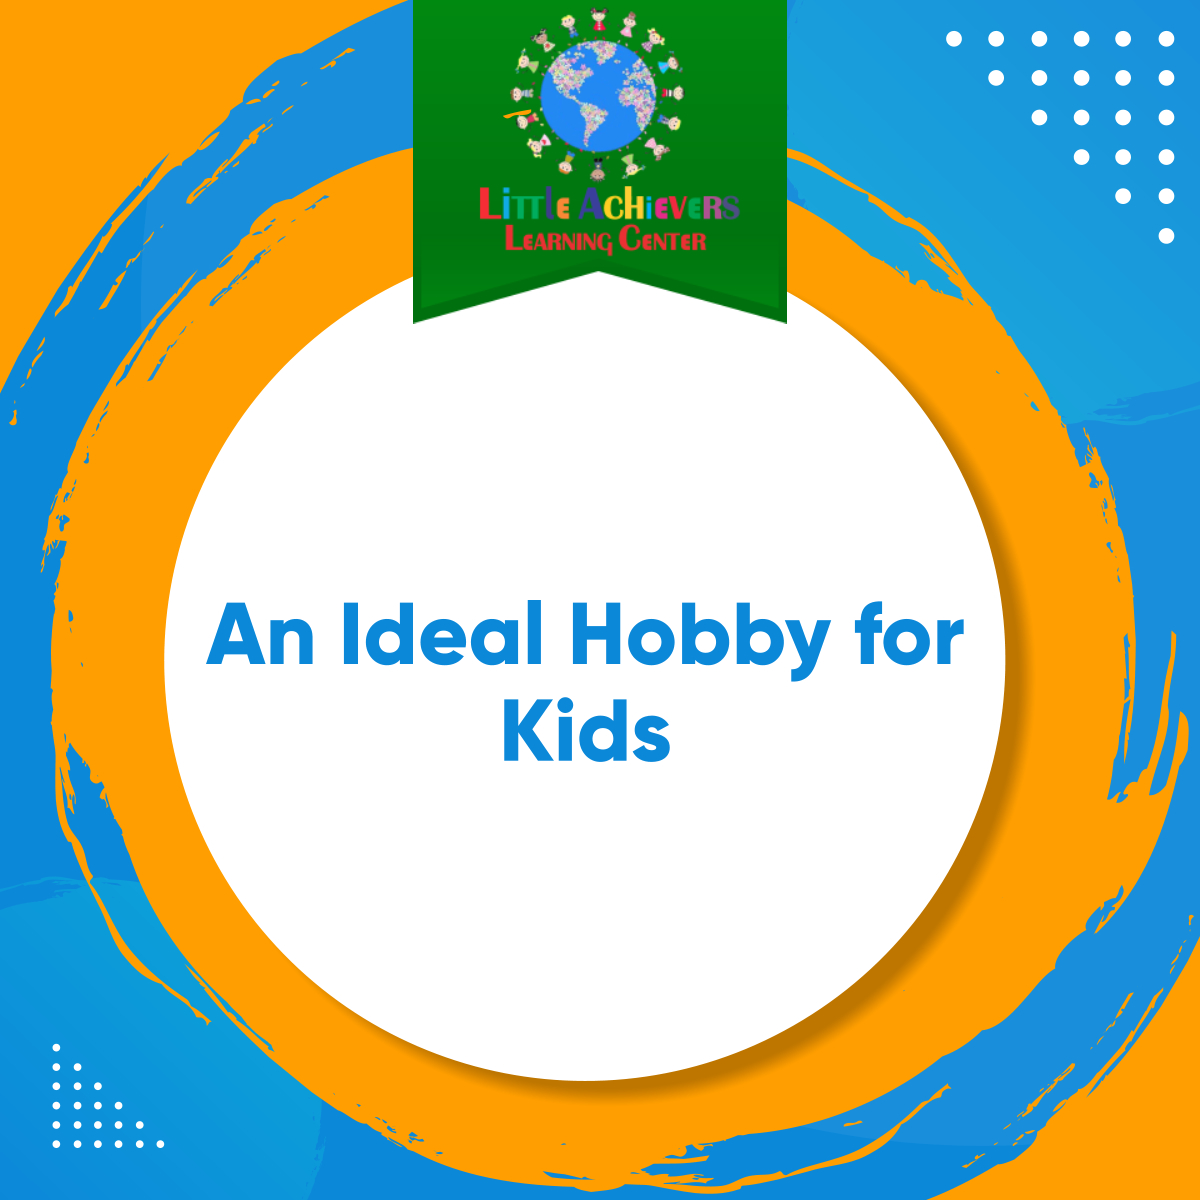 Having hobbies is helpful for children to boost their cognitive and physical functions. An ideal hobby for them is reading. It fosters their sense of imagination and helps broaden their vocabulary. 

Grab some books for your little one!

#CognitiveSkill #LearningCenter